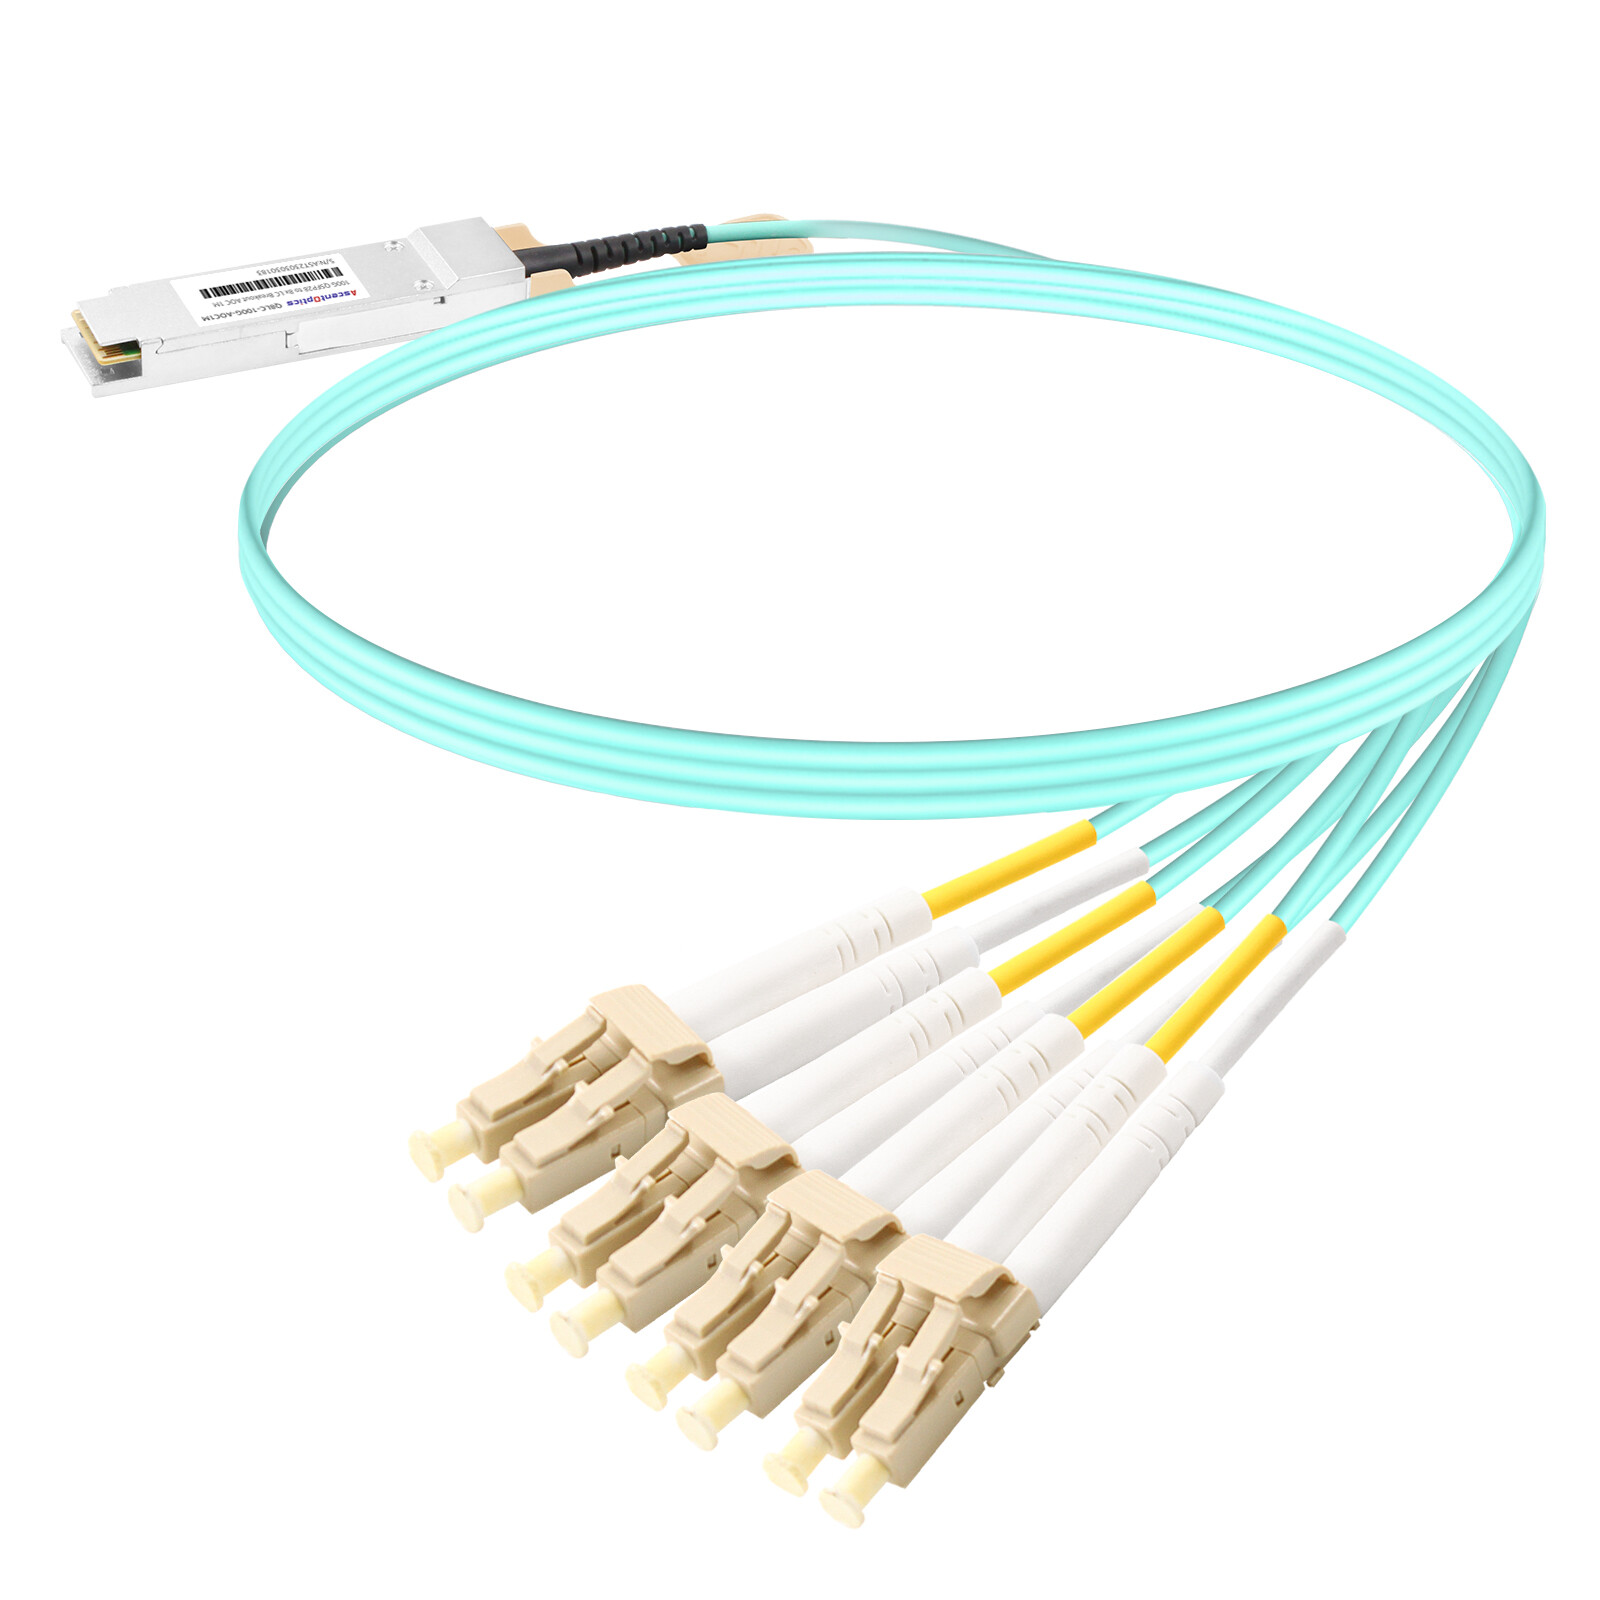 100G QSFP28 to 8x LC Breakout AOC Cable,1 Meter